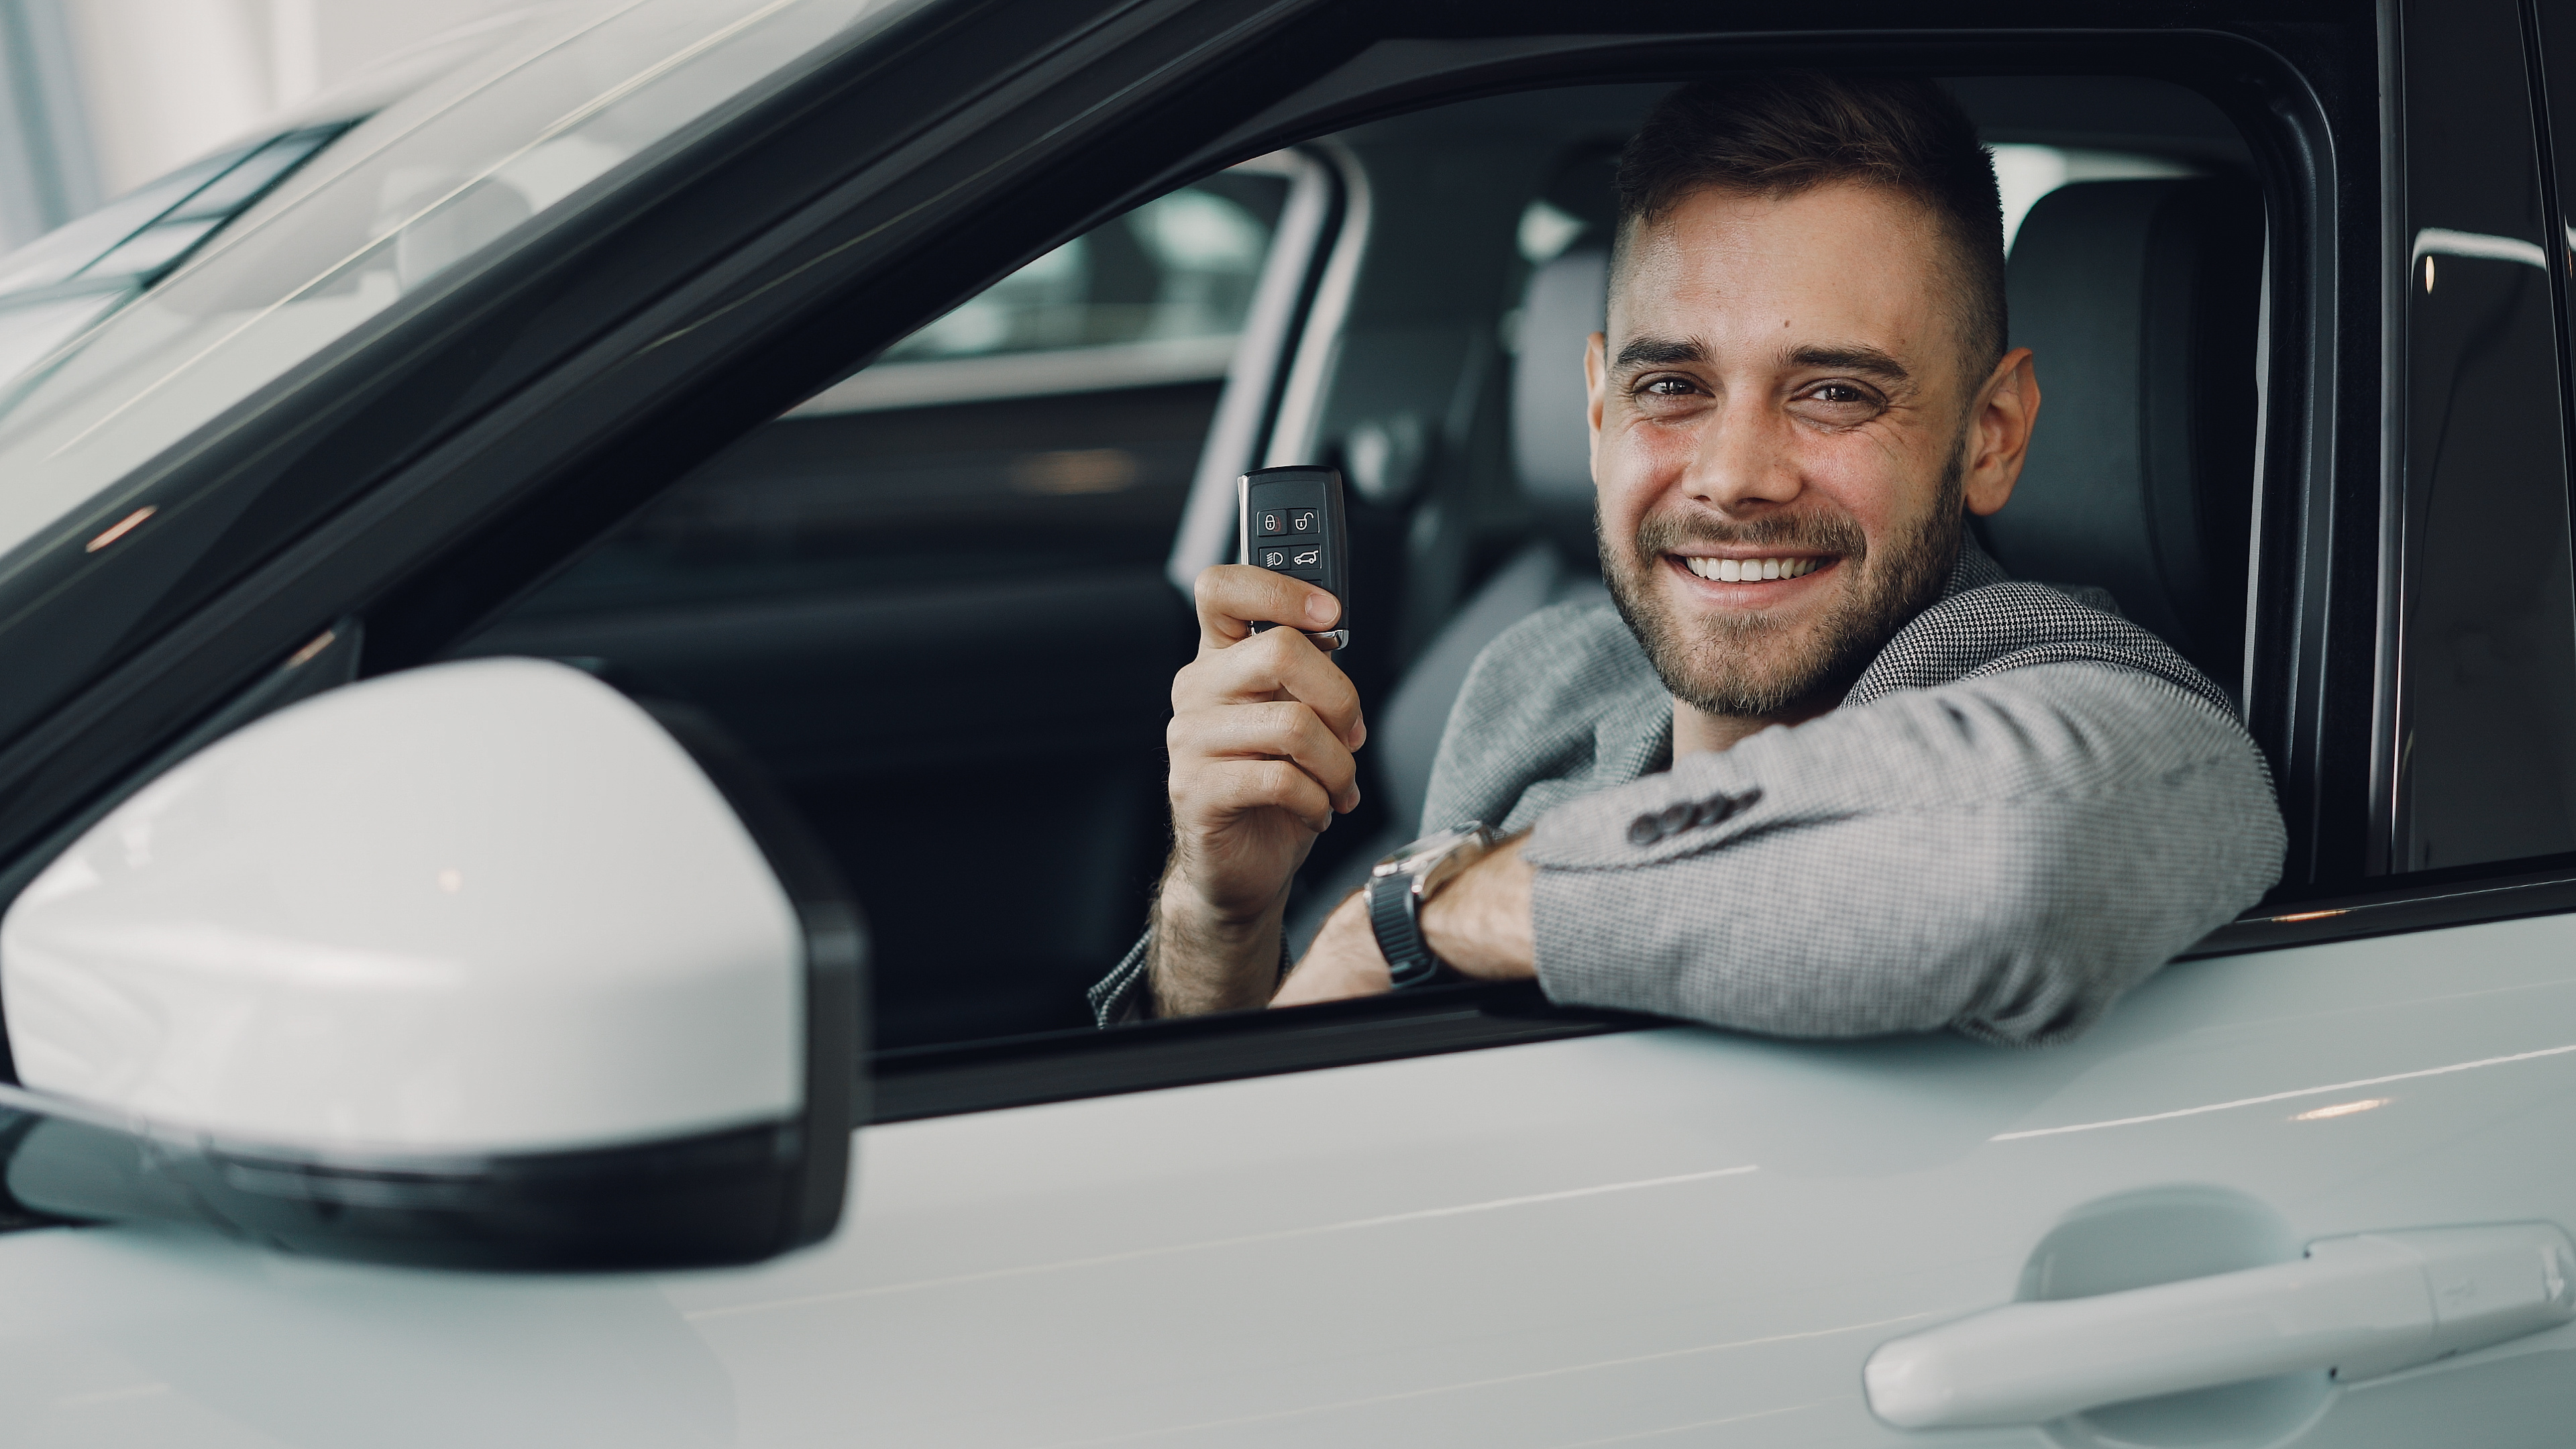 Man-smiling-after-getting-keys-to-new-car